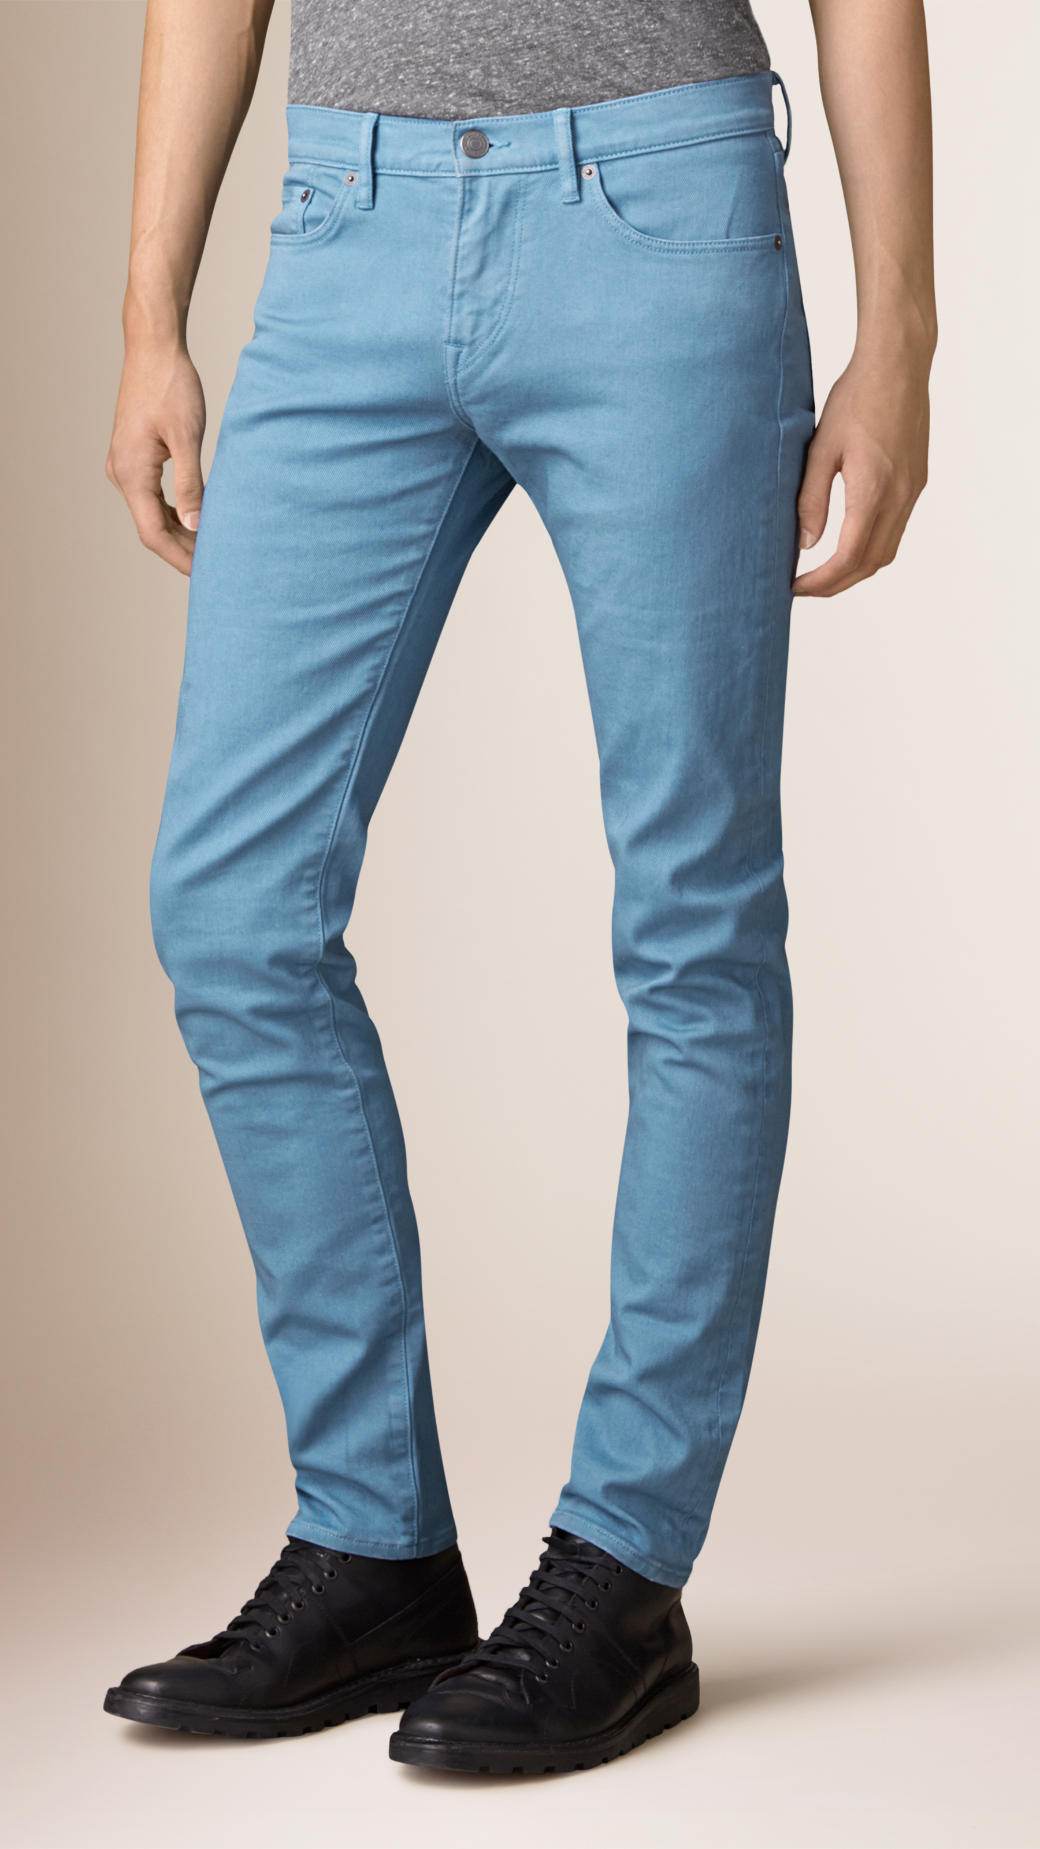 Burberry Slim Fit Hand-Sprayed Jeans in Powder Blue (Blue) for Men - Lyst